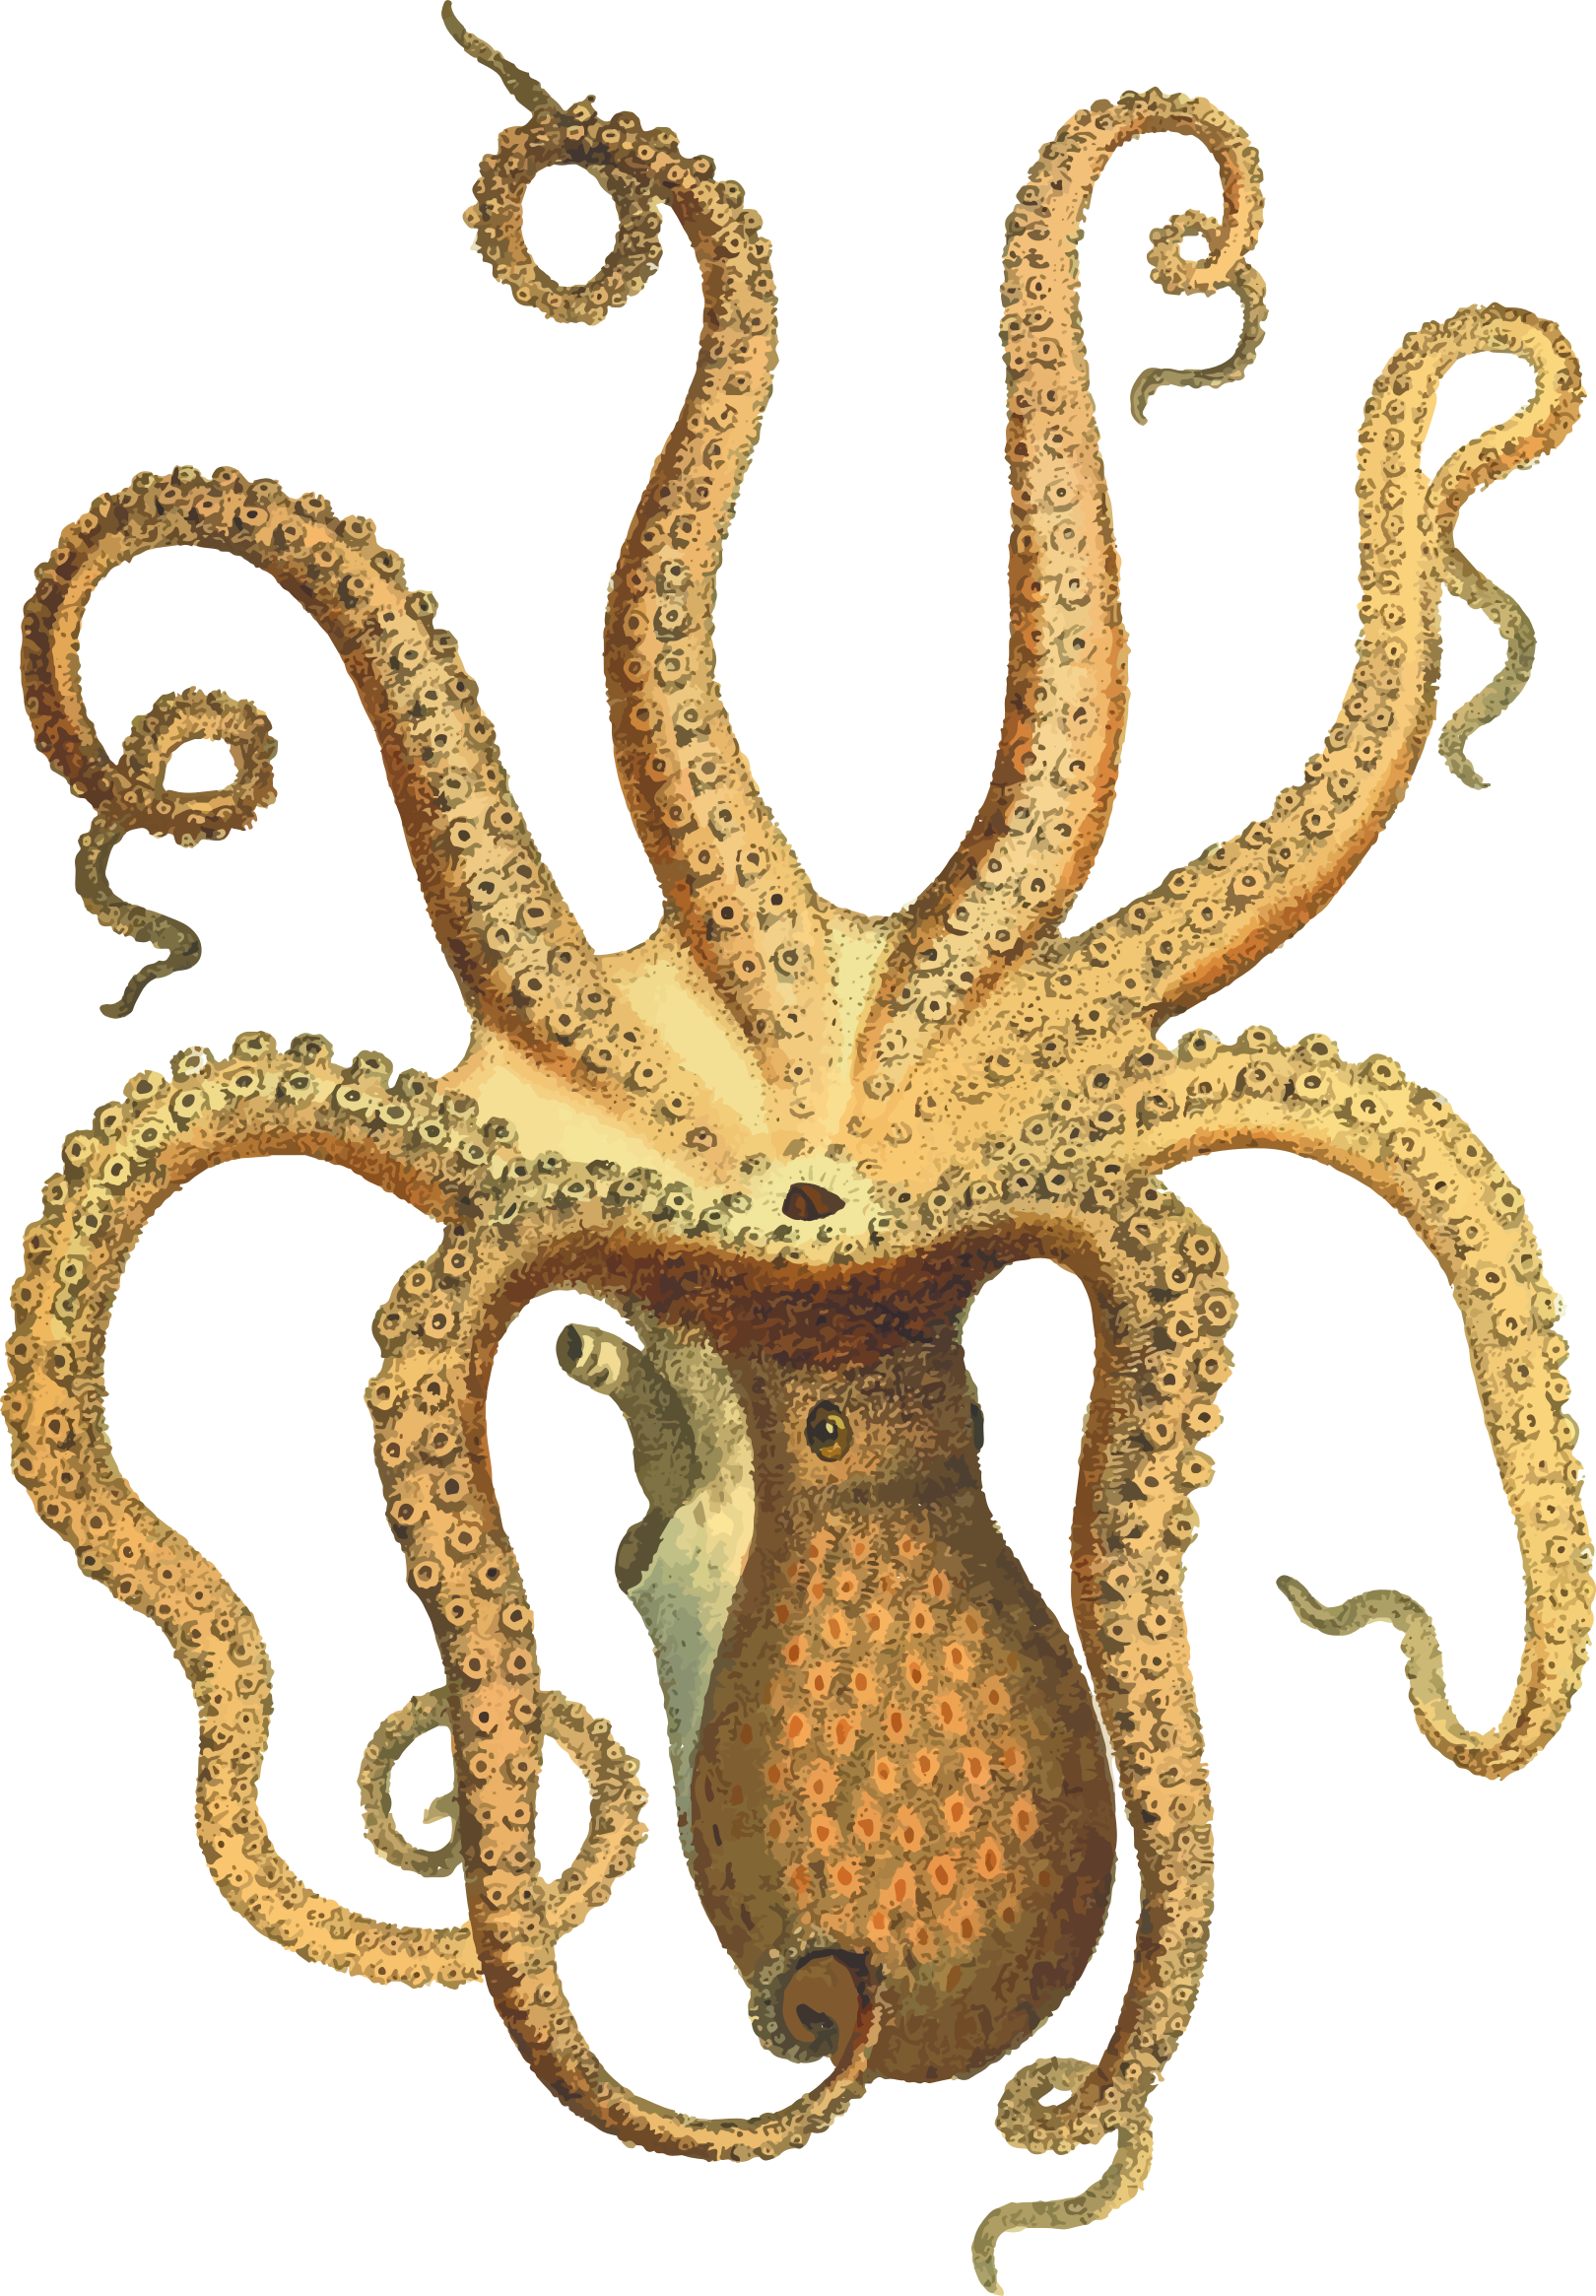 By gdj pixabay on. Clipart octopus vintage